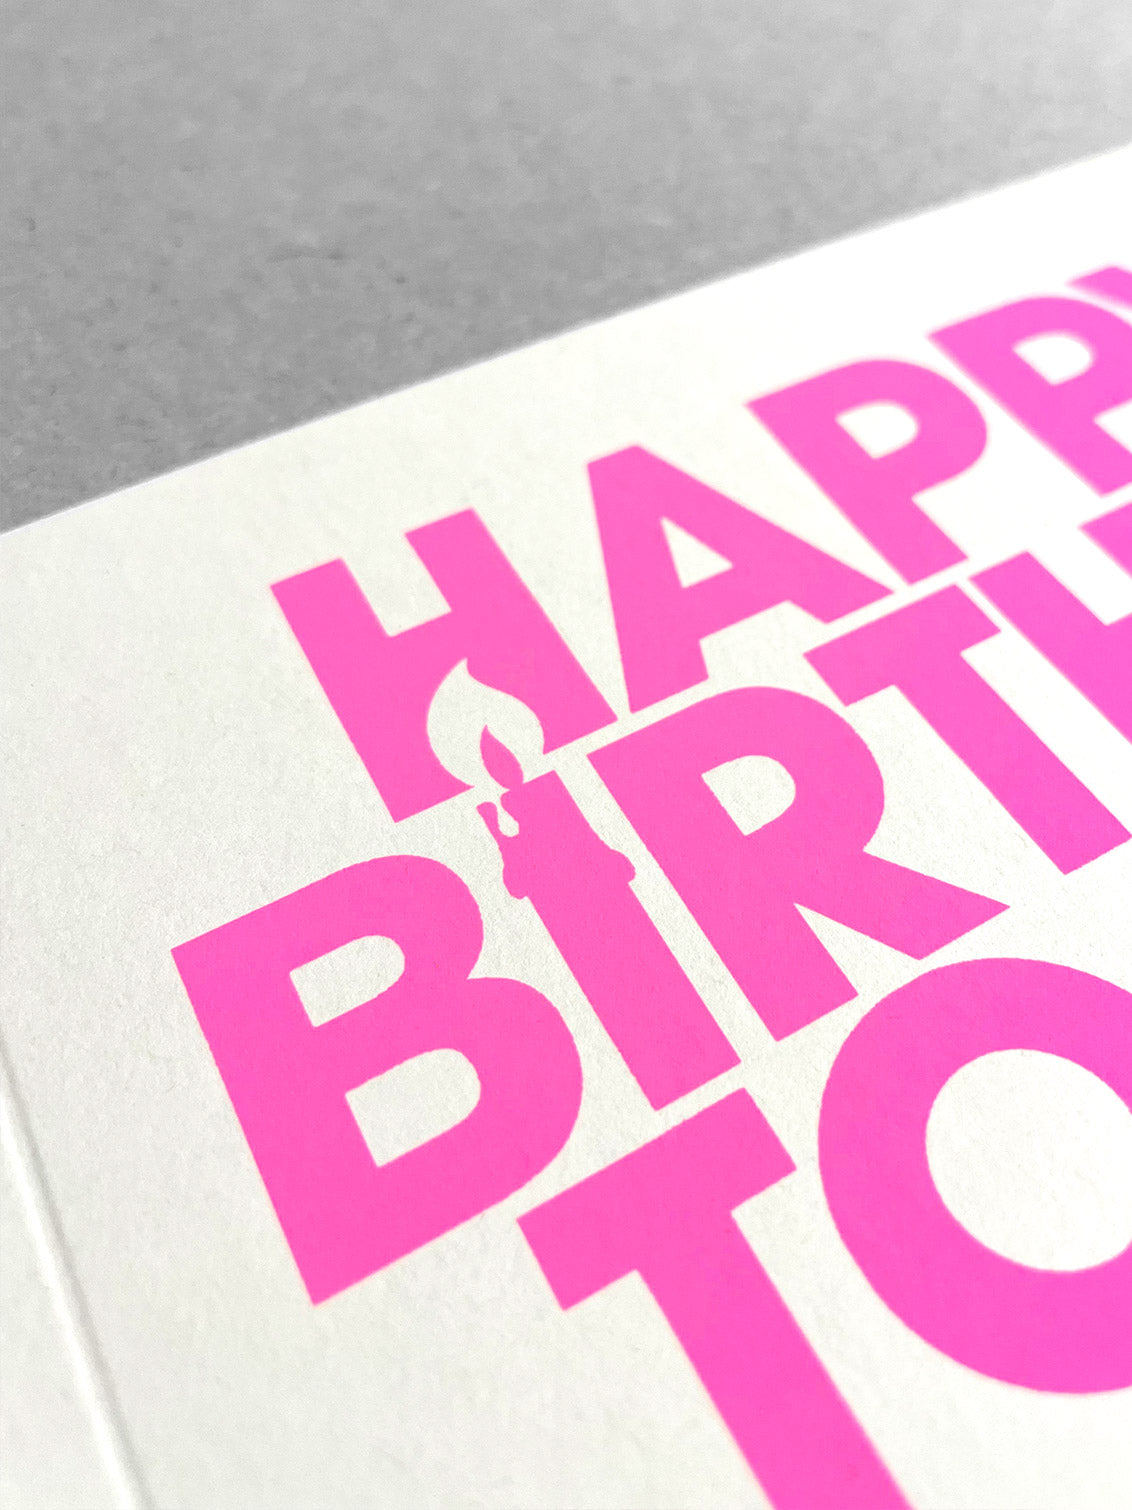 Happy birthday to you card - Neon pink